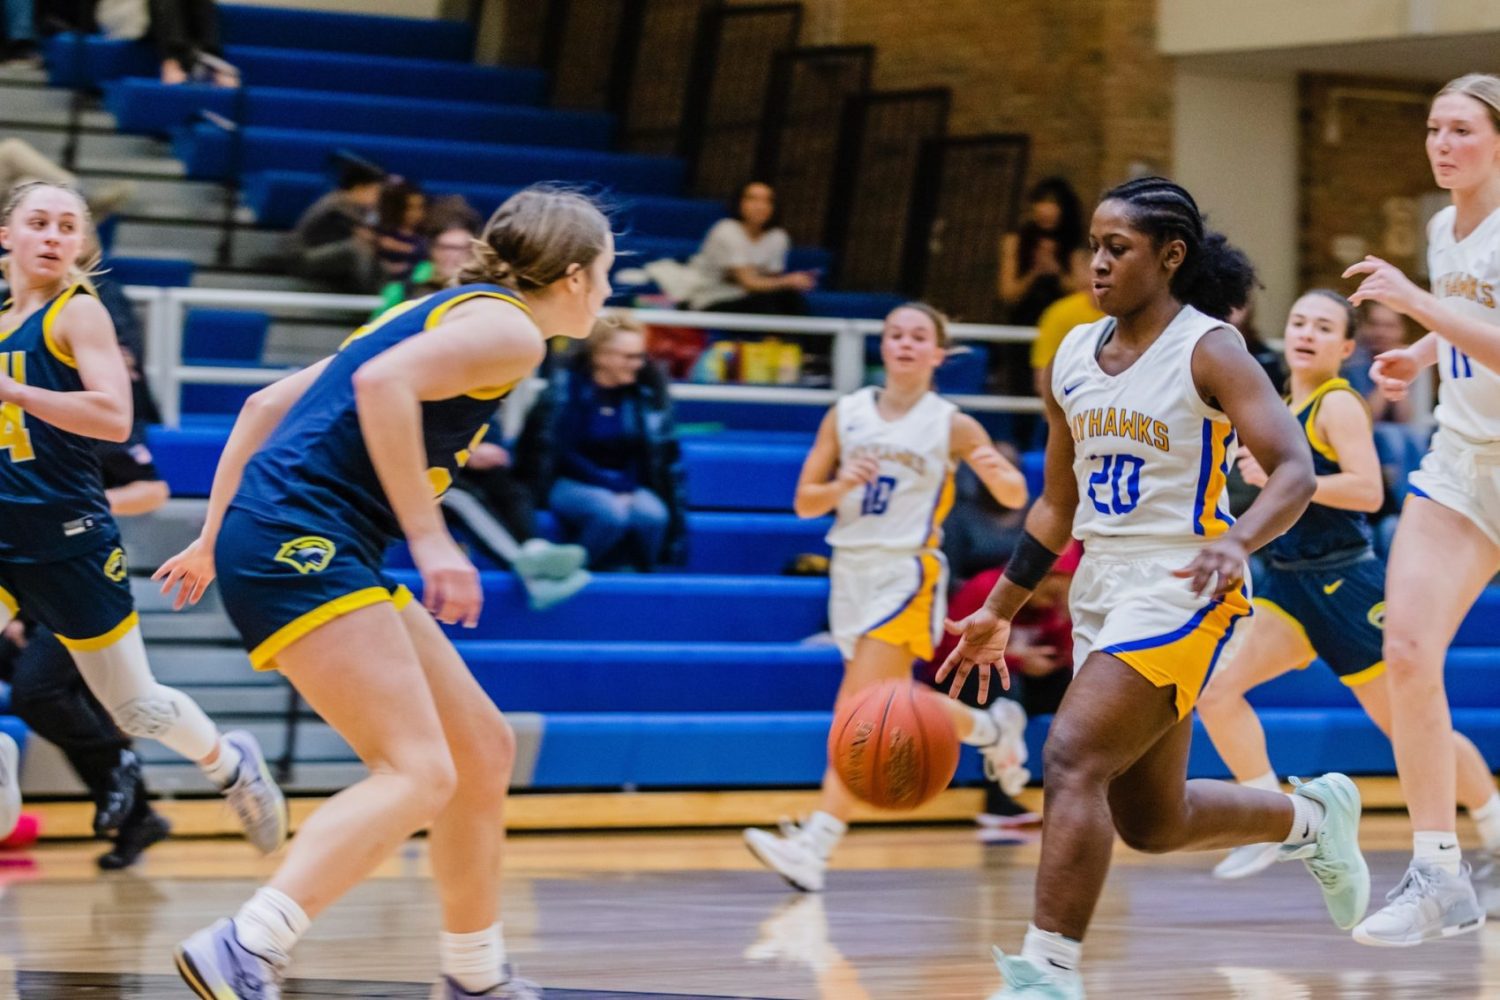 Lady Jayhawks open conference play with rout of Delta Community College